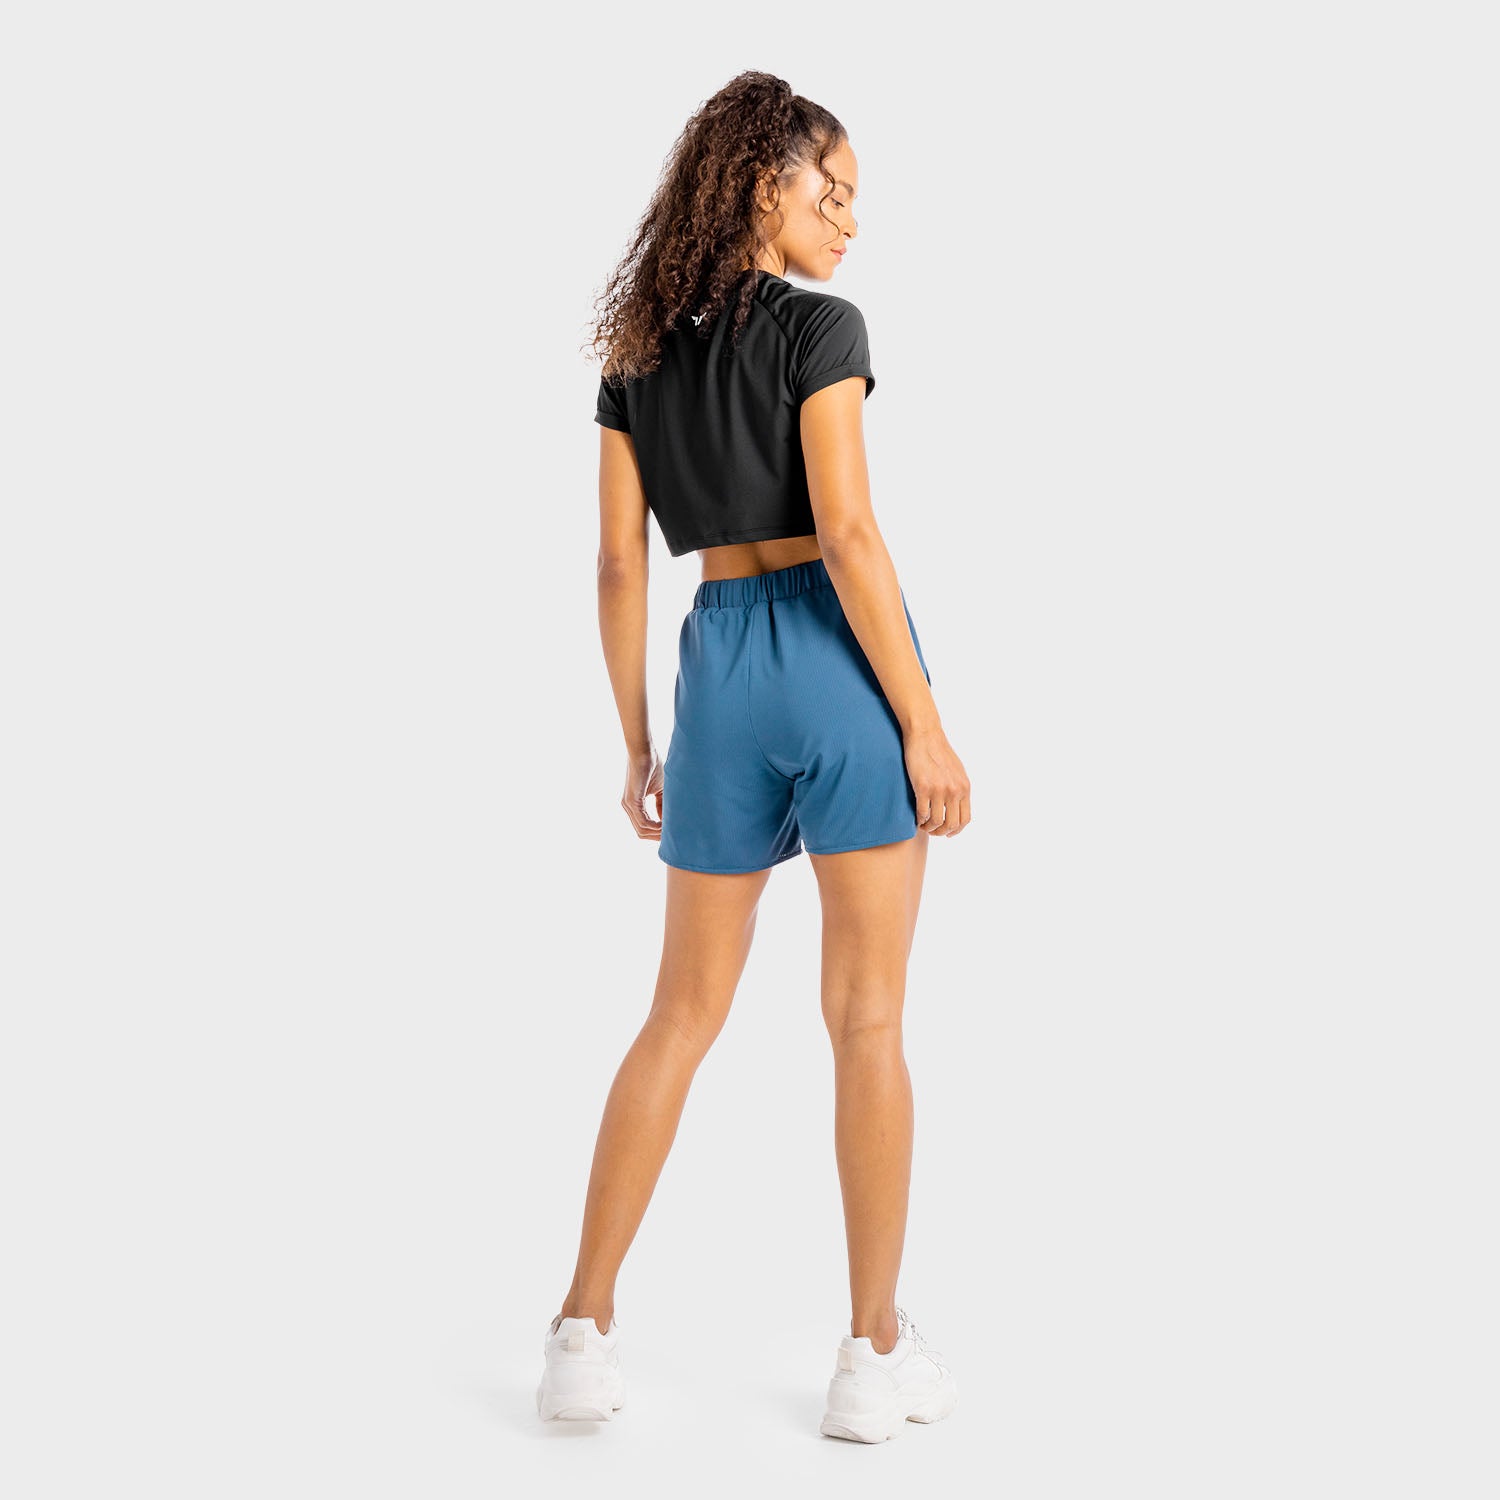 squatwolf-workout-clothes-core-2-in-1-shorts-blue-gym-shorts-for-women